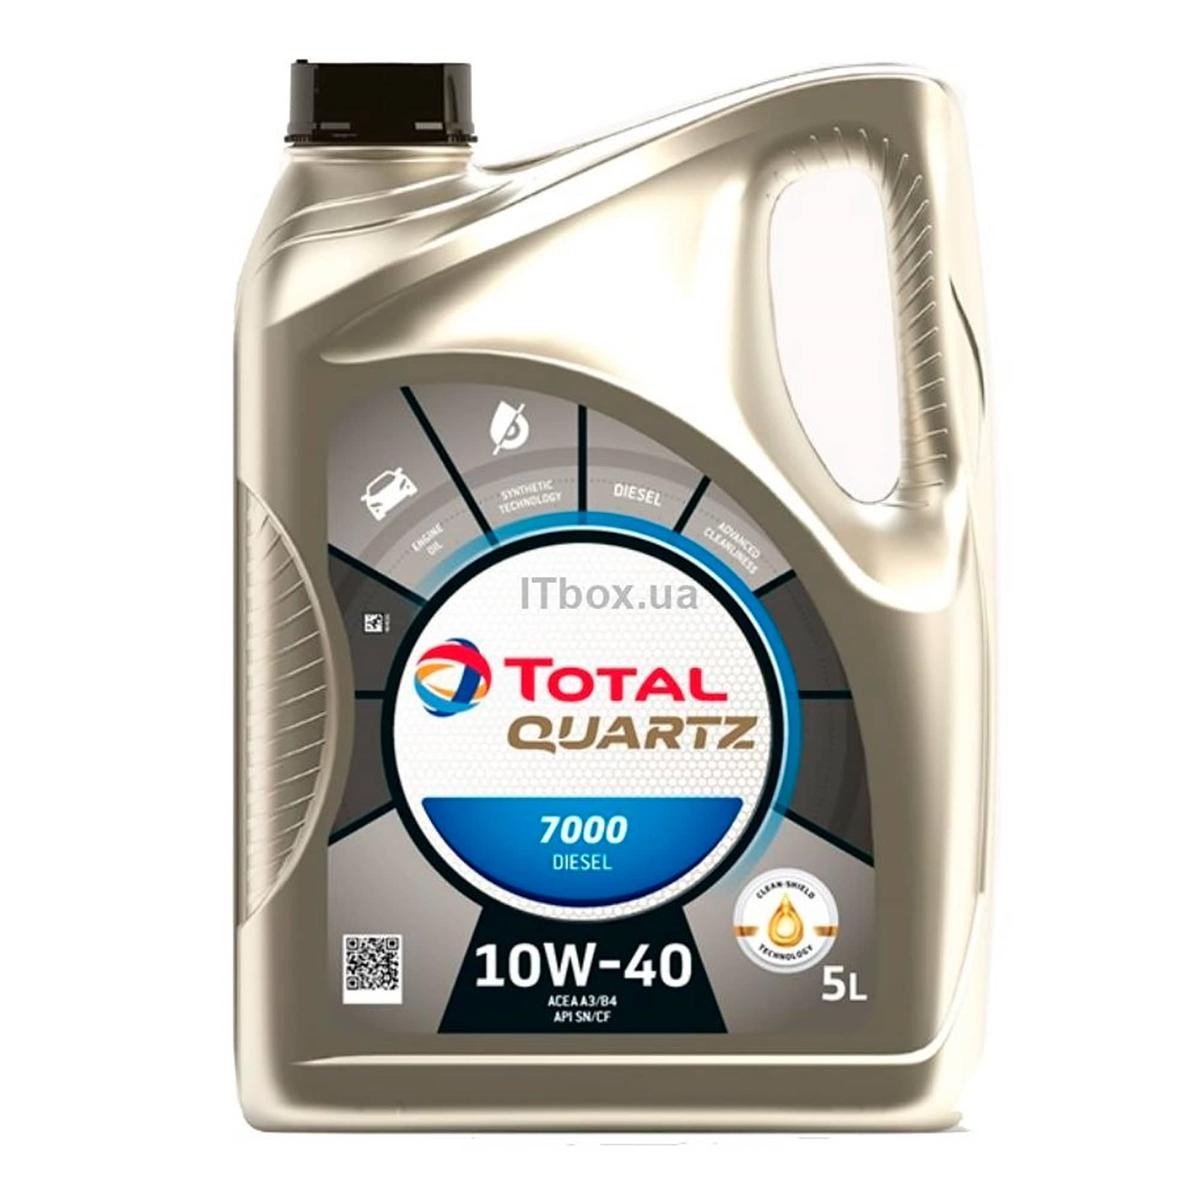 TOTAL 2202844 Engine oil cheap in online store